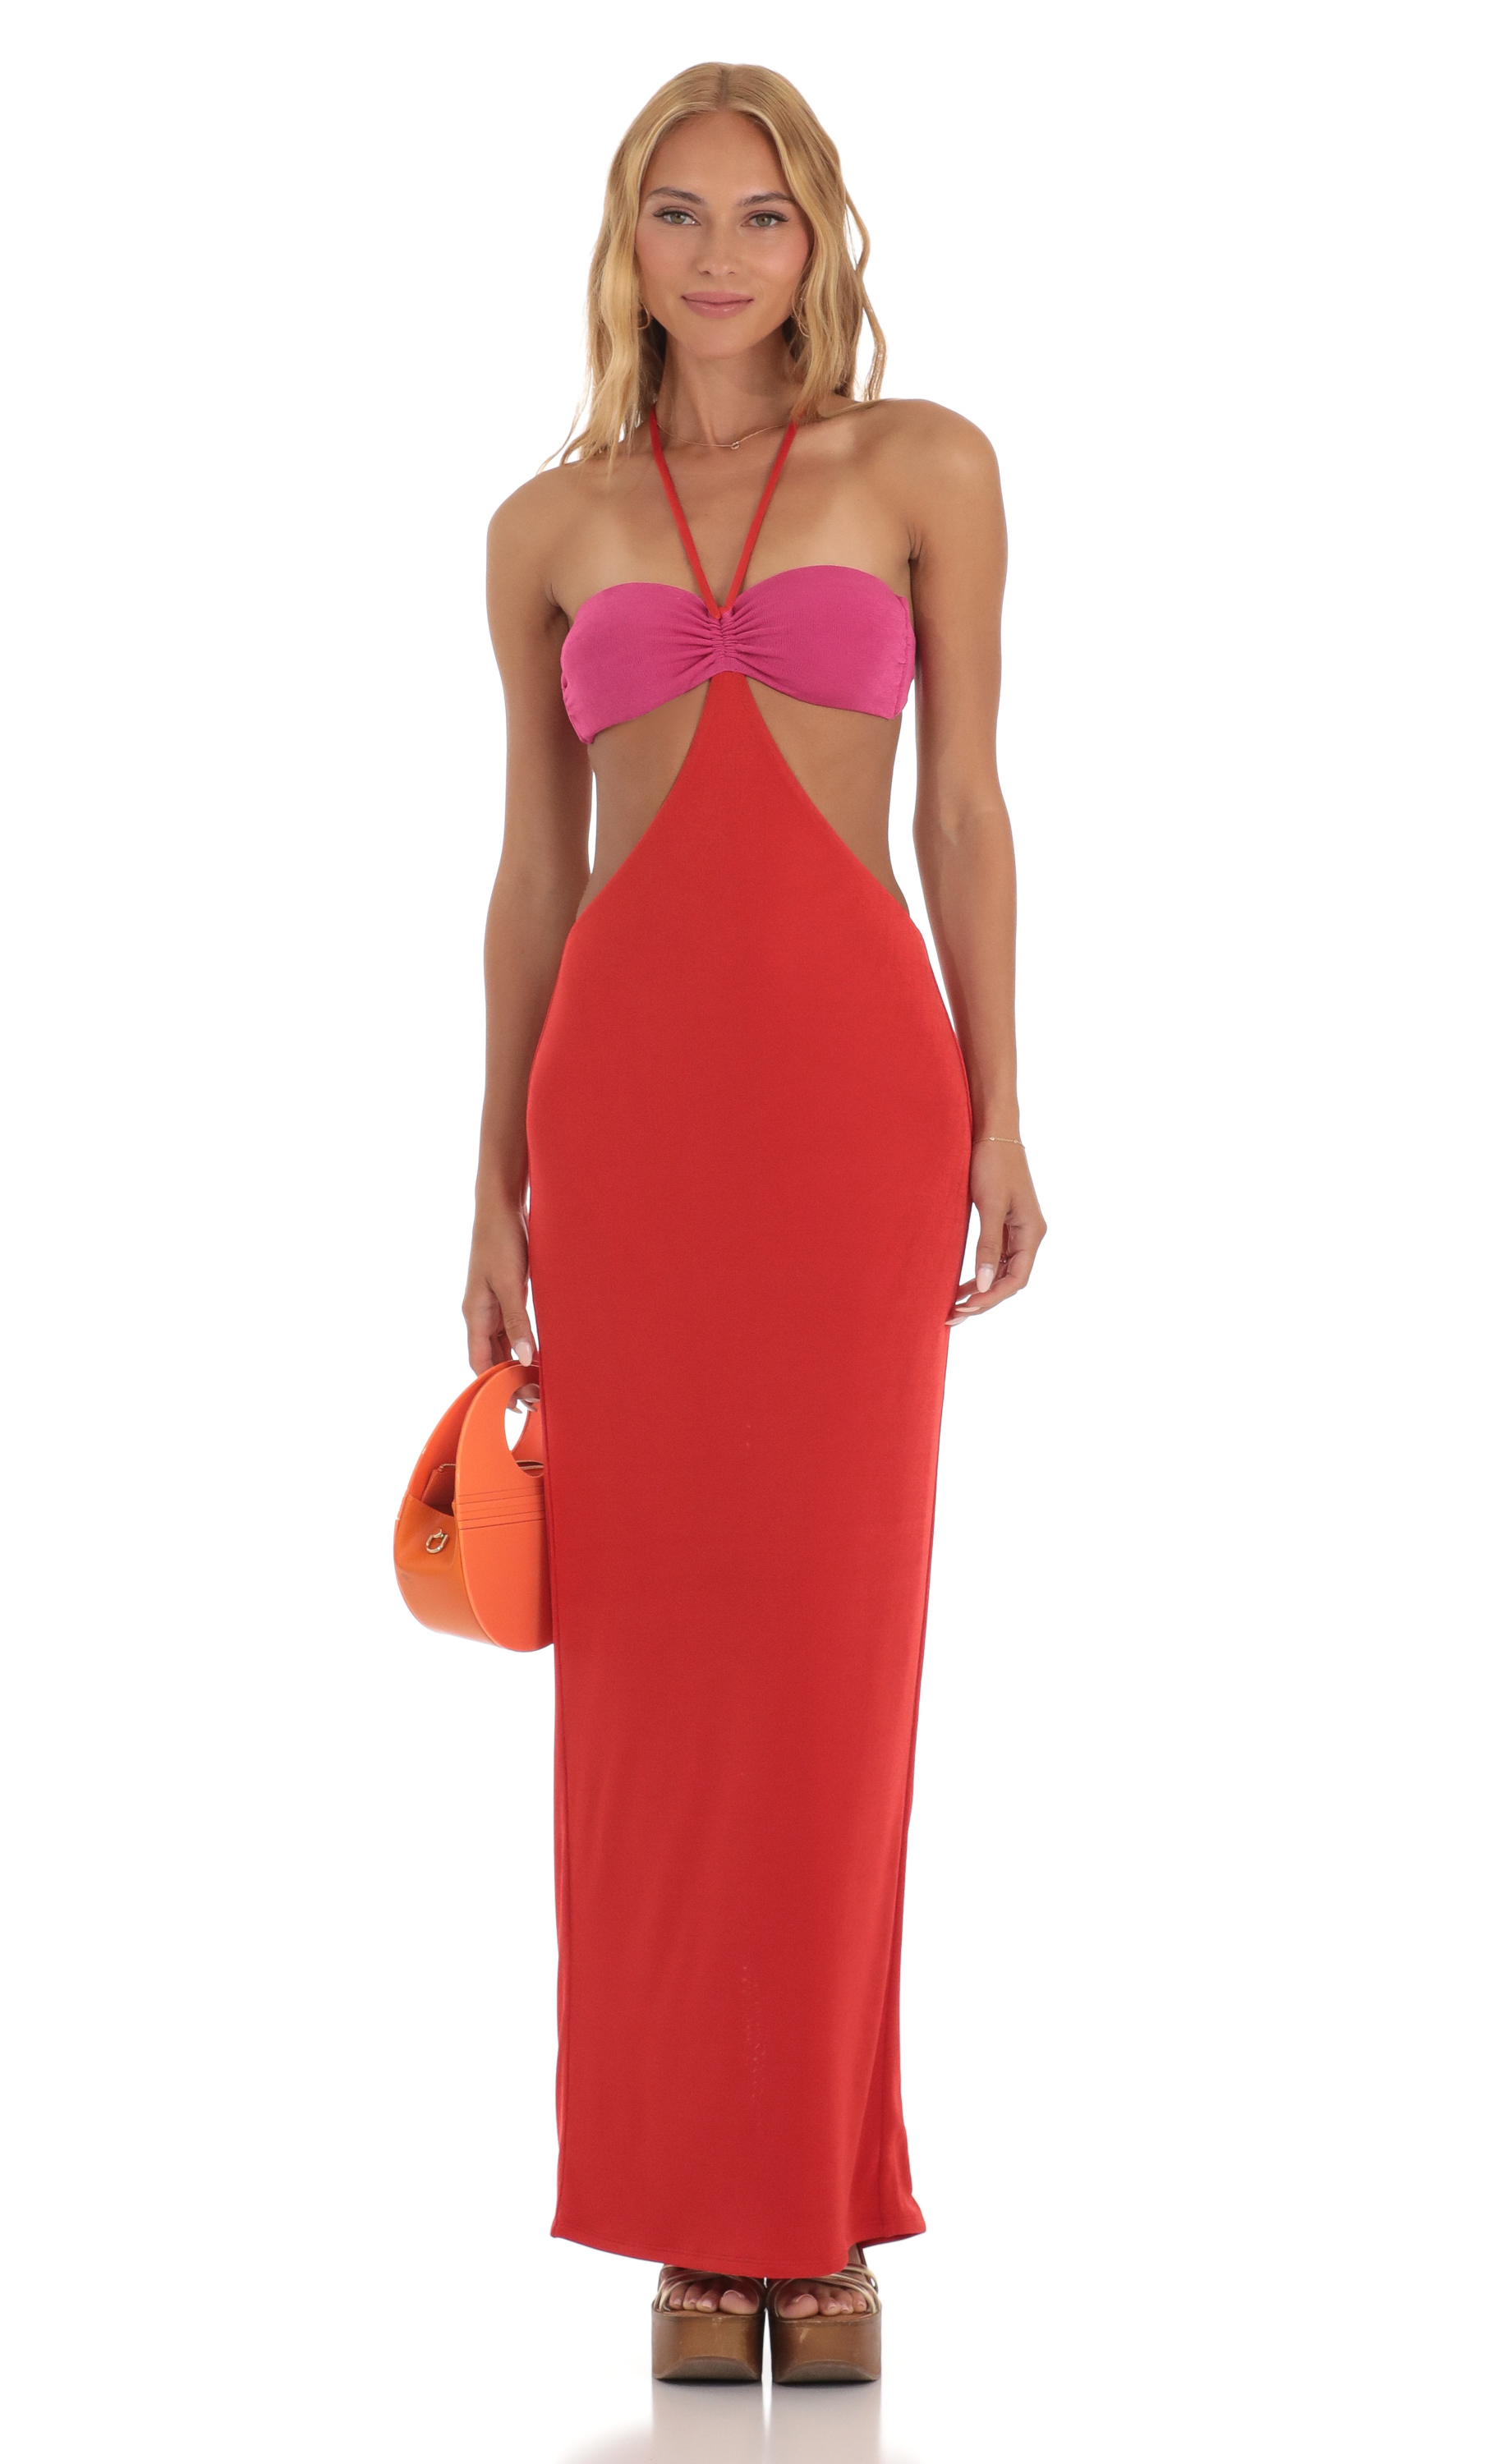 Two Toned Cutout Maxi Dress in Red and Pink